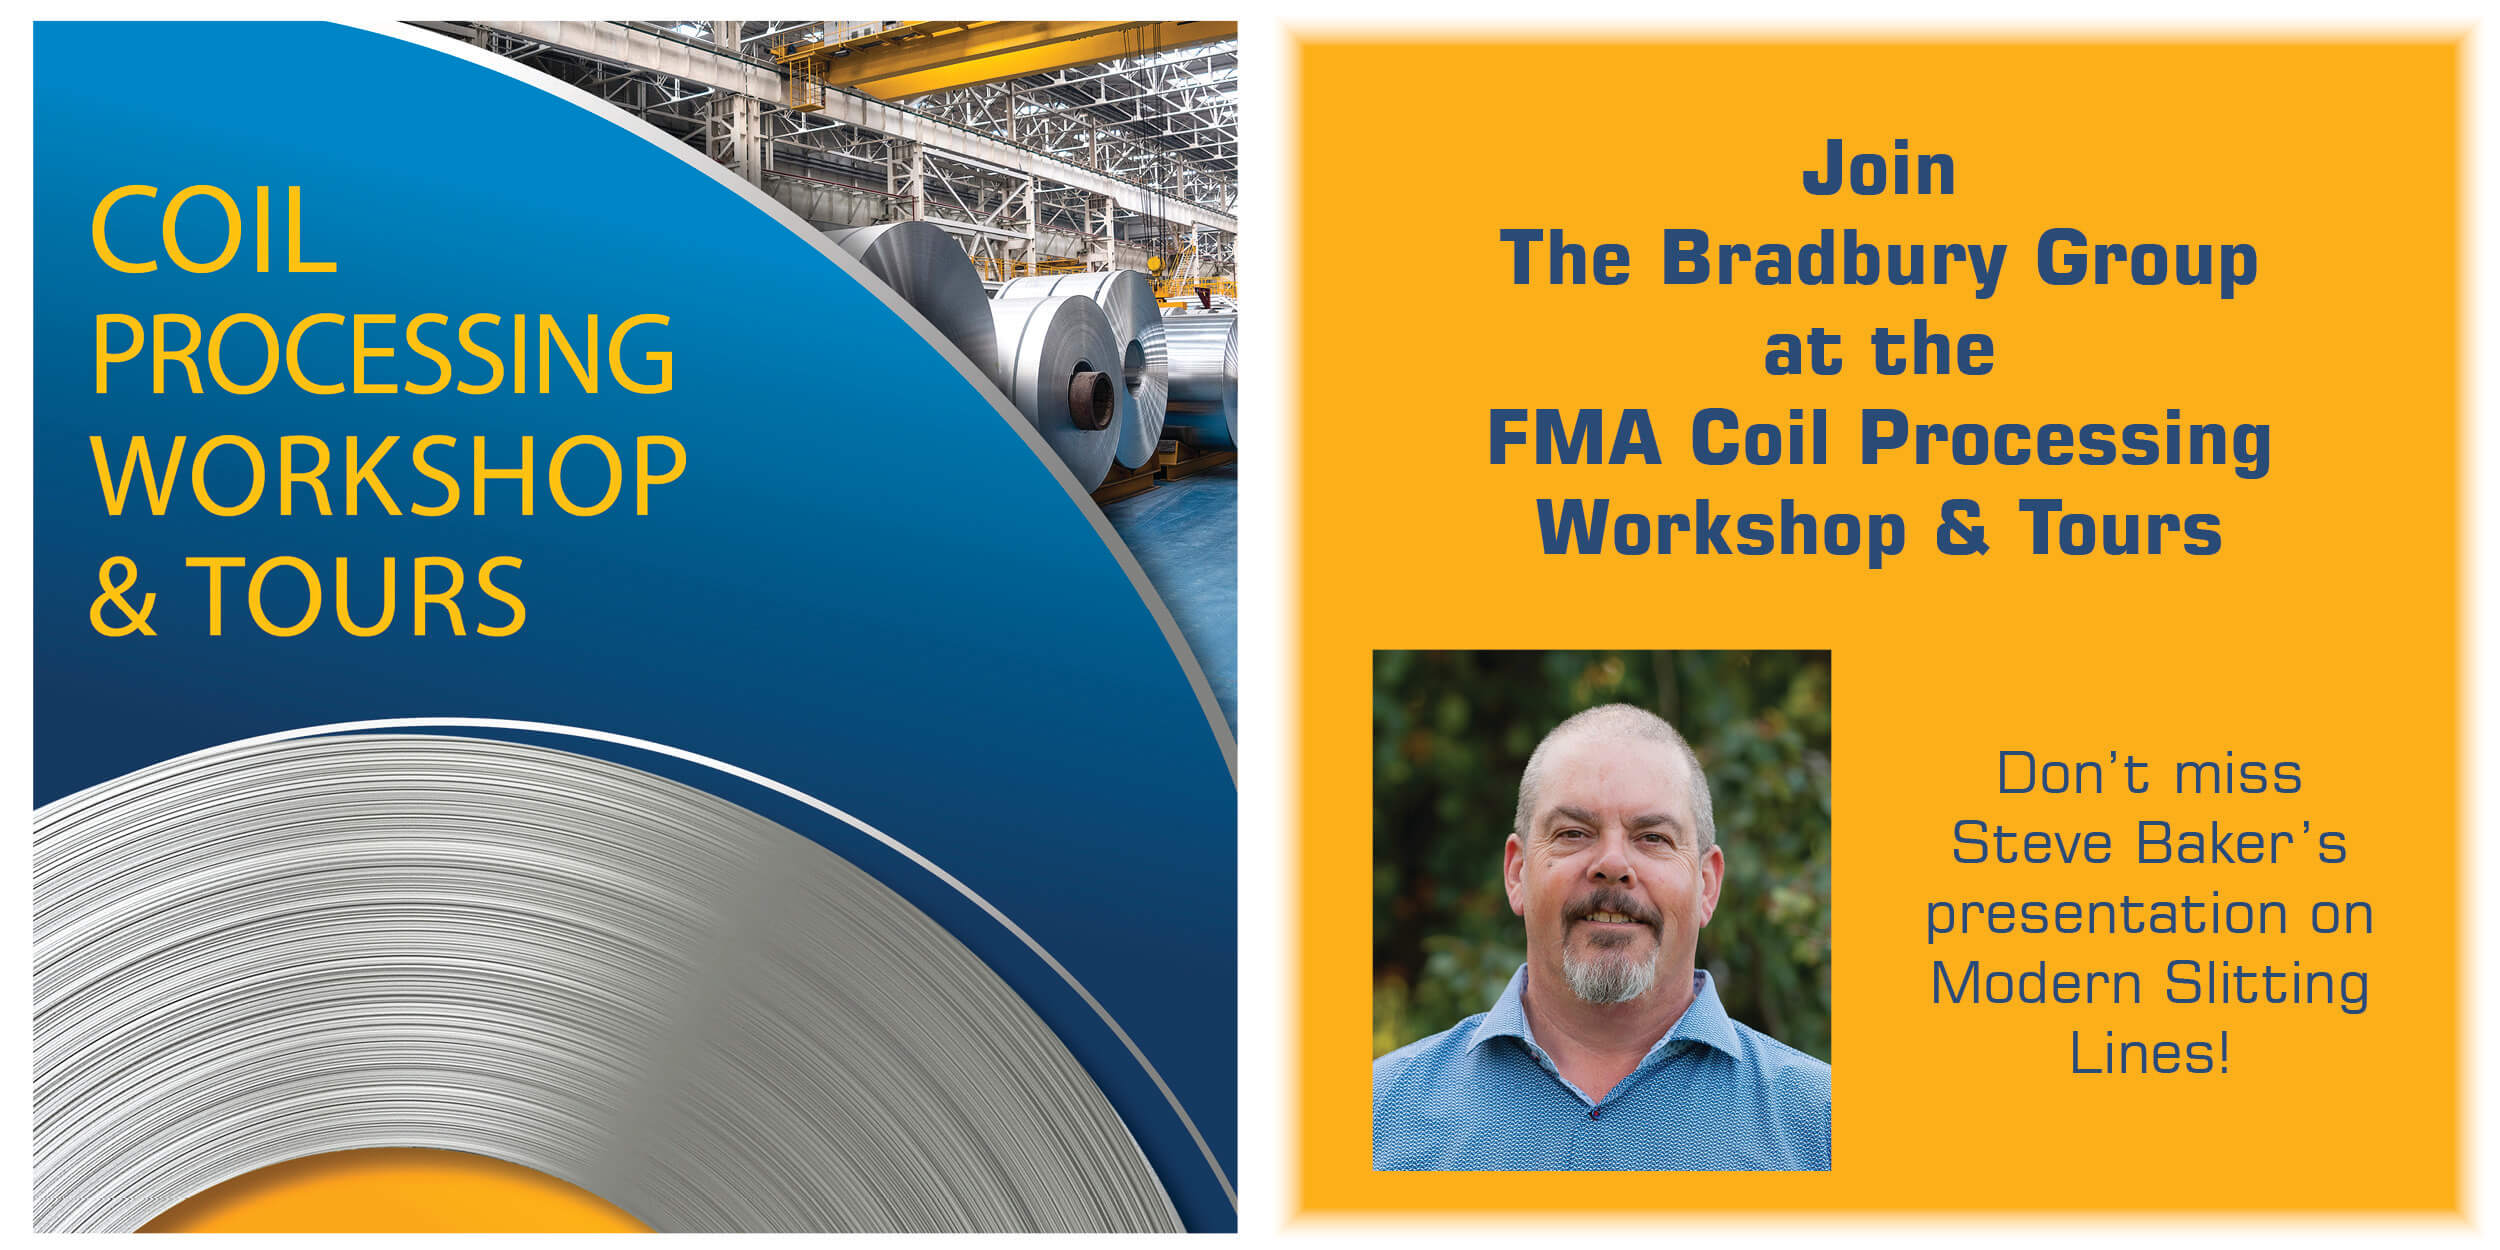 Steve Baker with The Bradbury Group presenting at the FMA Coil Processing workshop 2022